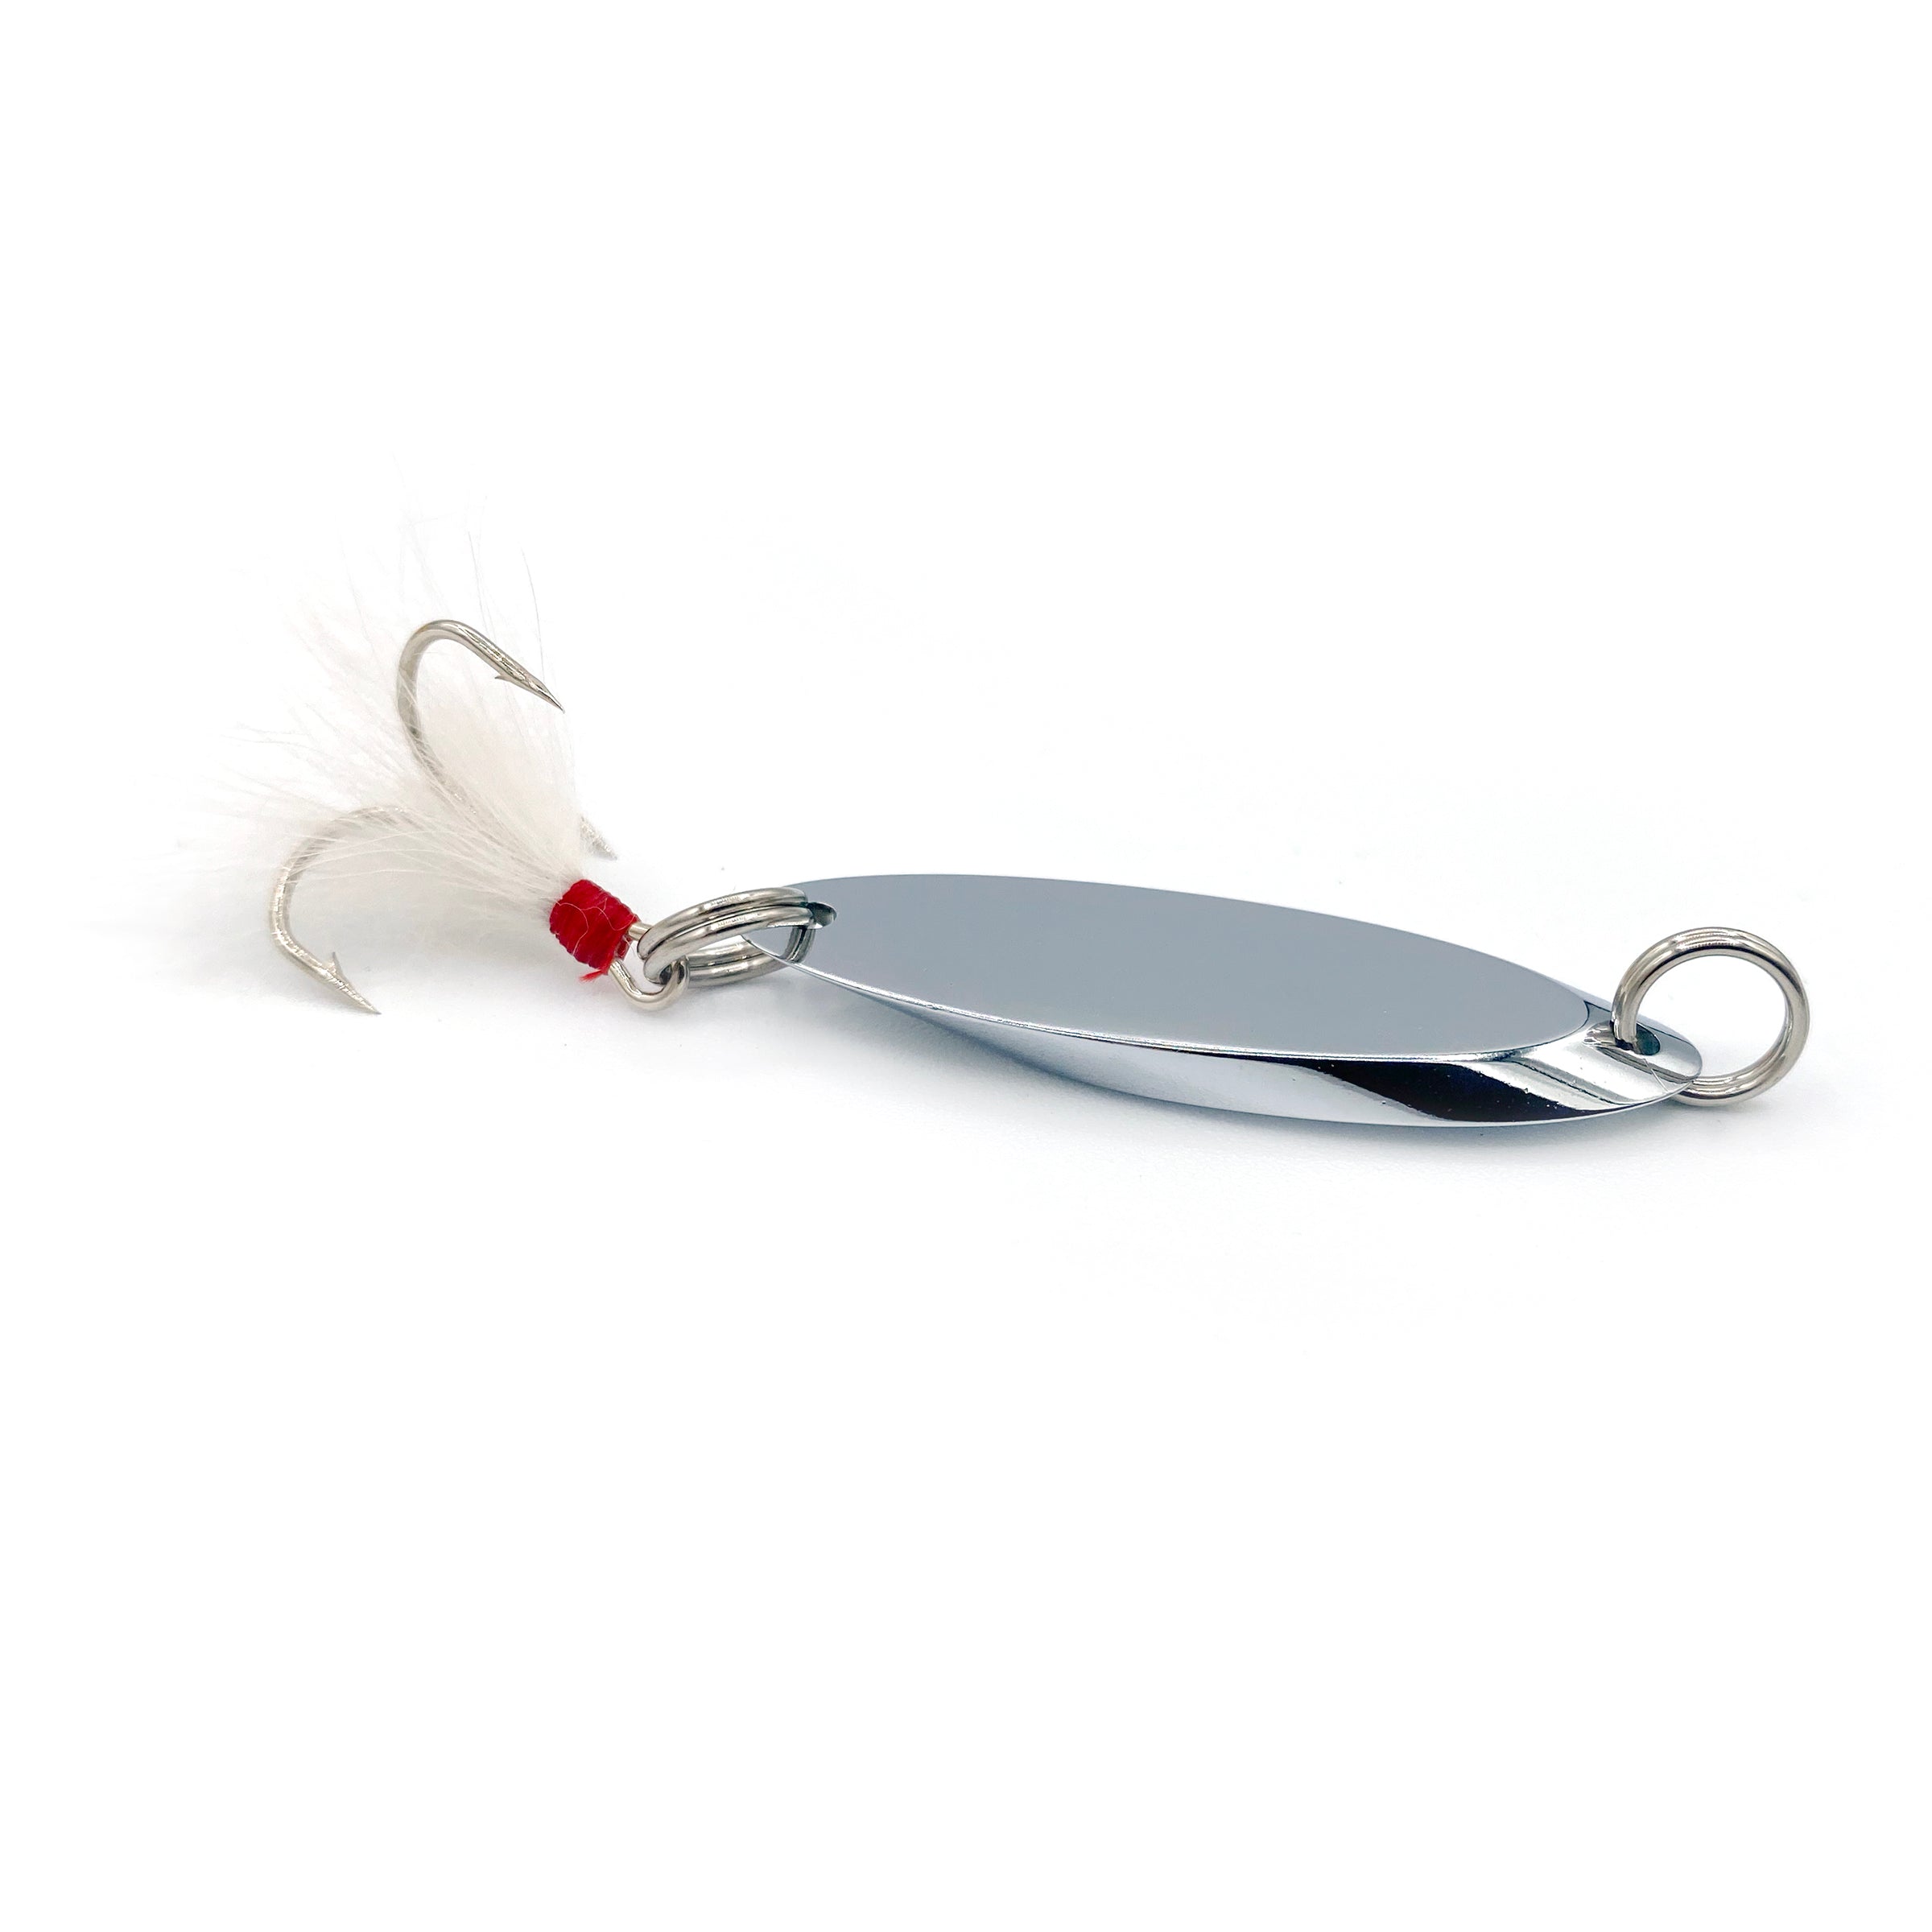  Sea Striker SES300-1 Casting Spoon, Chrome, 3-Ounce  Carded,Multi : Sports & Outdoors